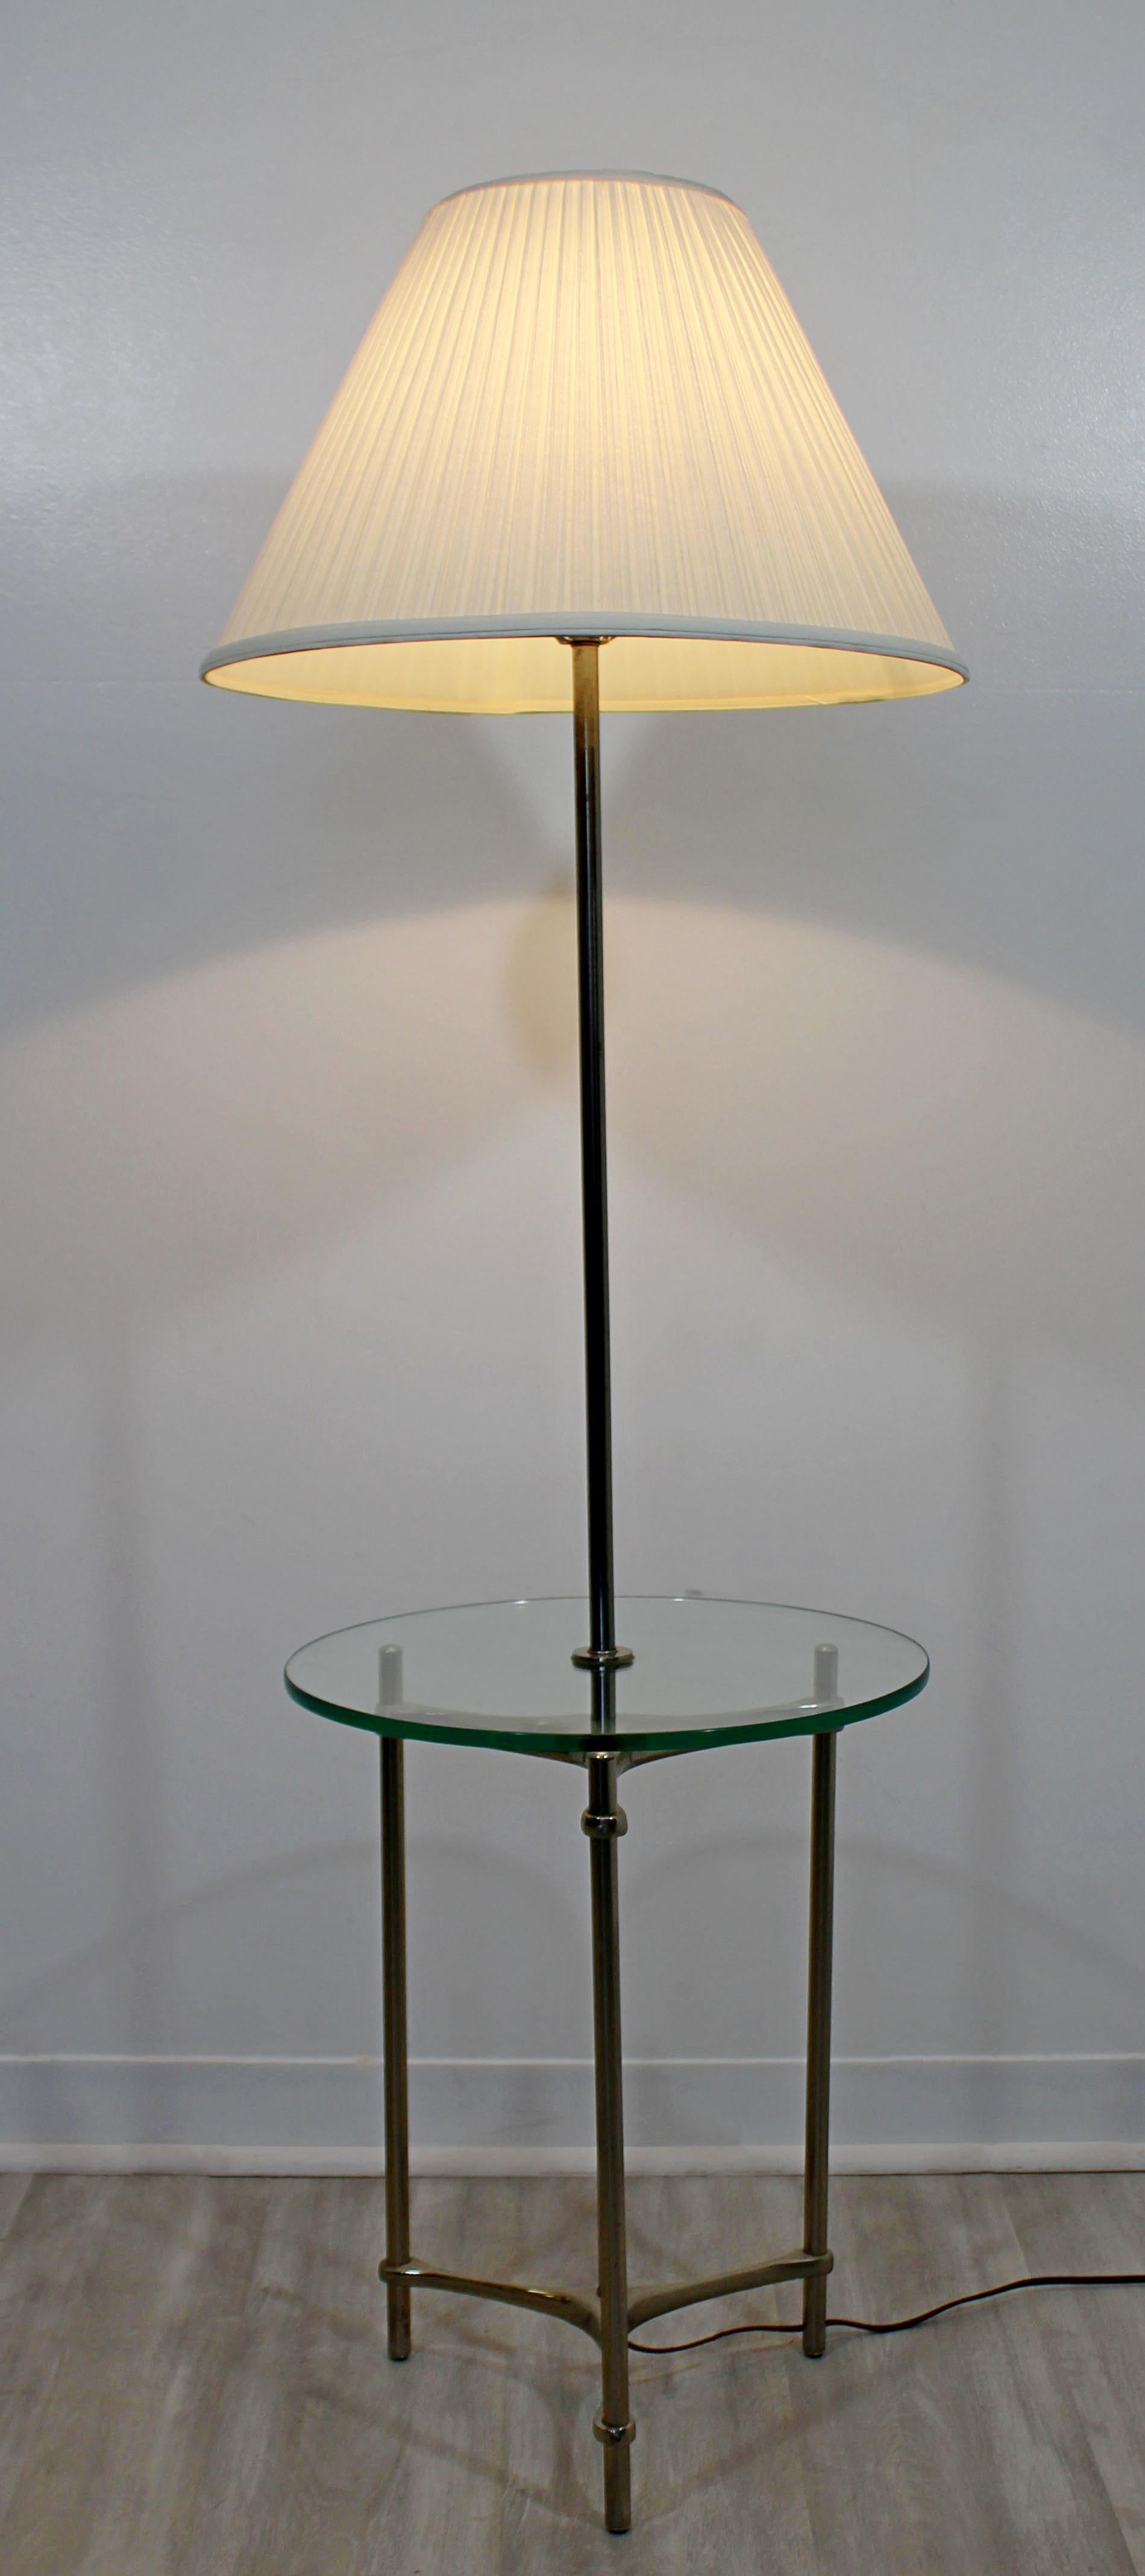 For your consideration is a fabulous, aluminum floor lamp, with glass table attached, by the Laurel Lamp Company, circa 1970s. Includes original shade and finial. In very good vintage condition. The dimensions are 18